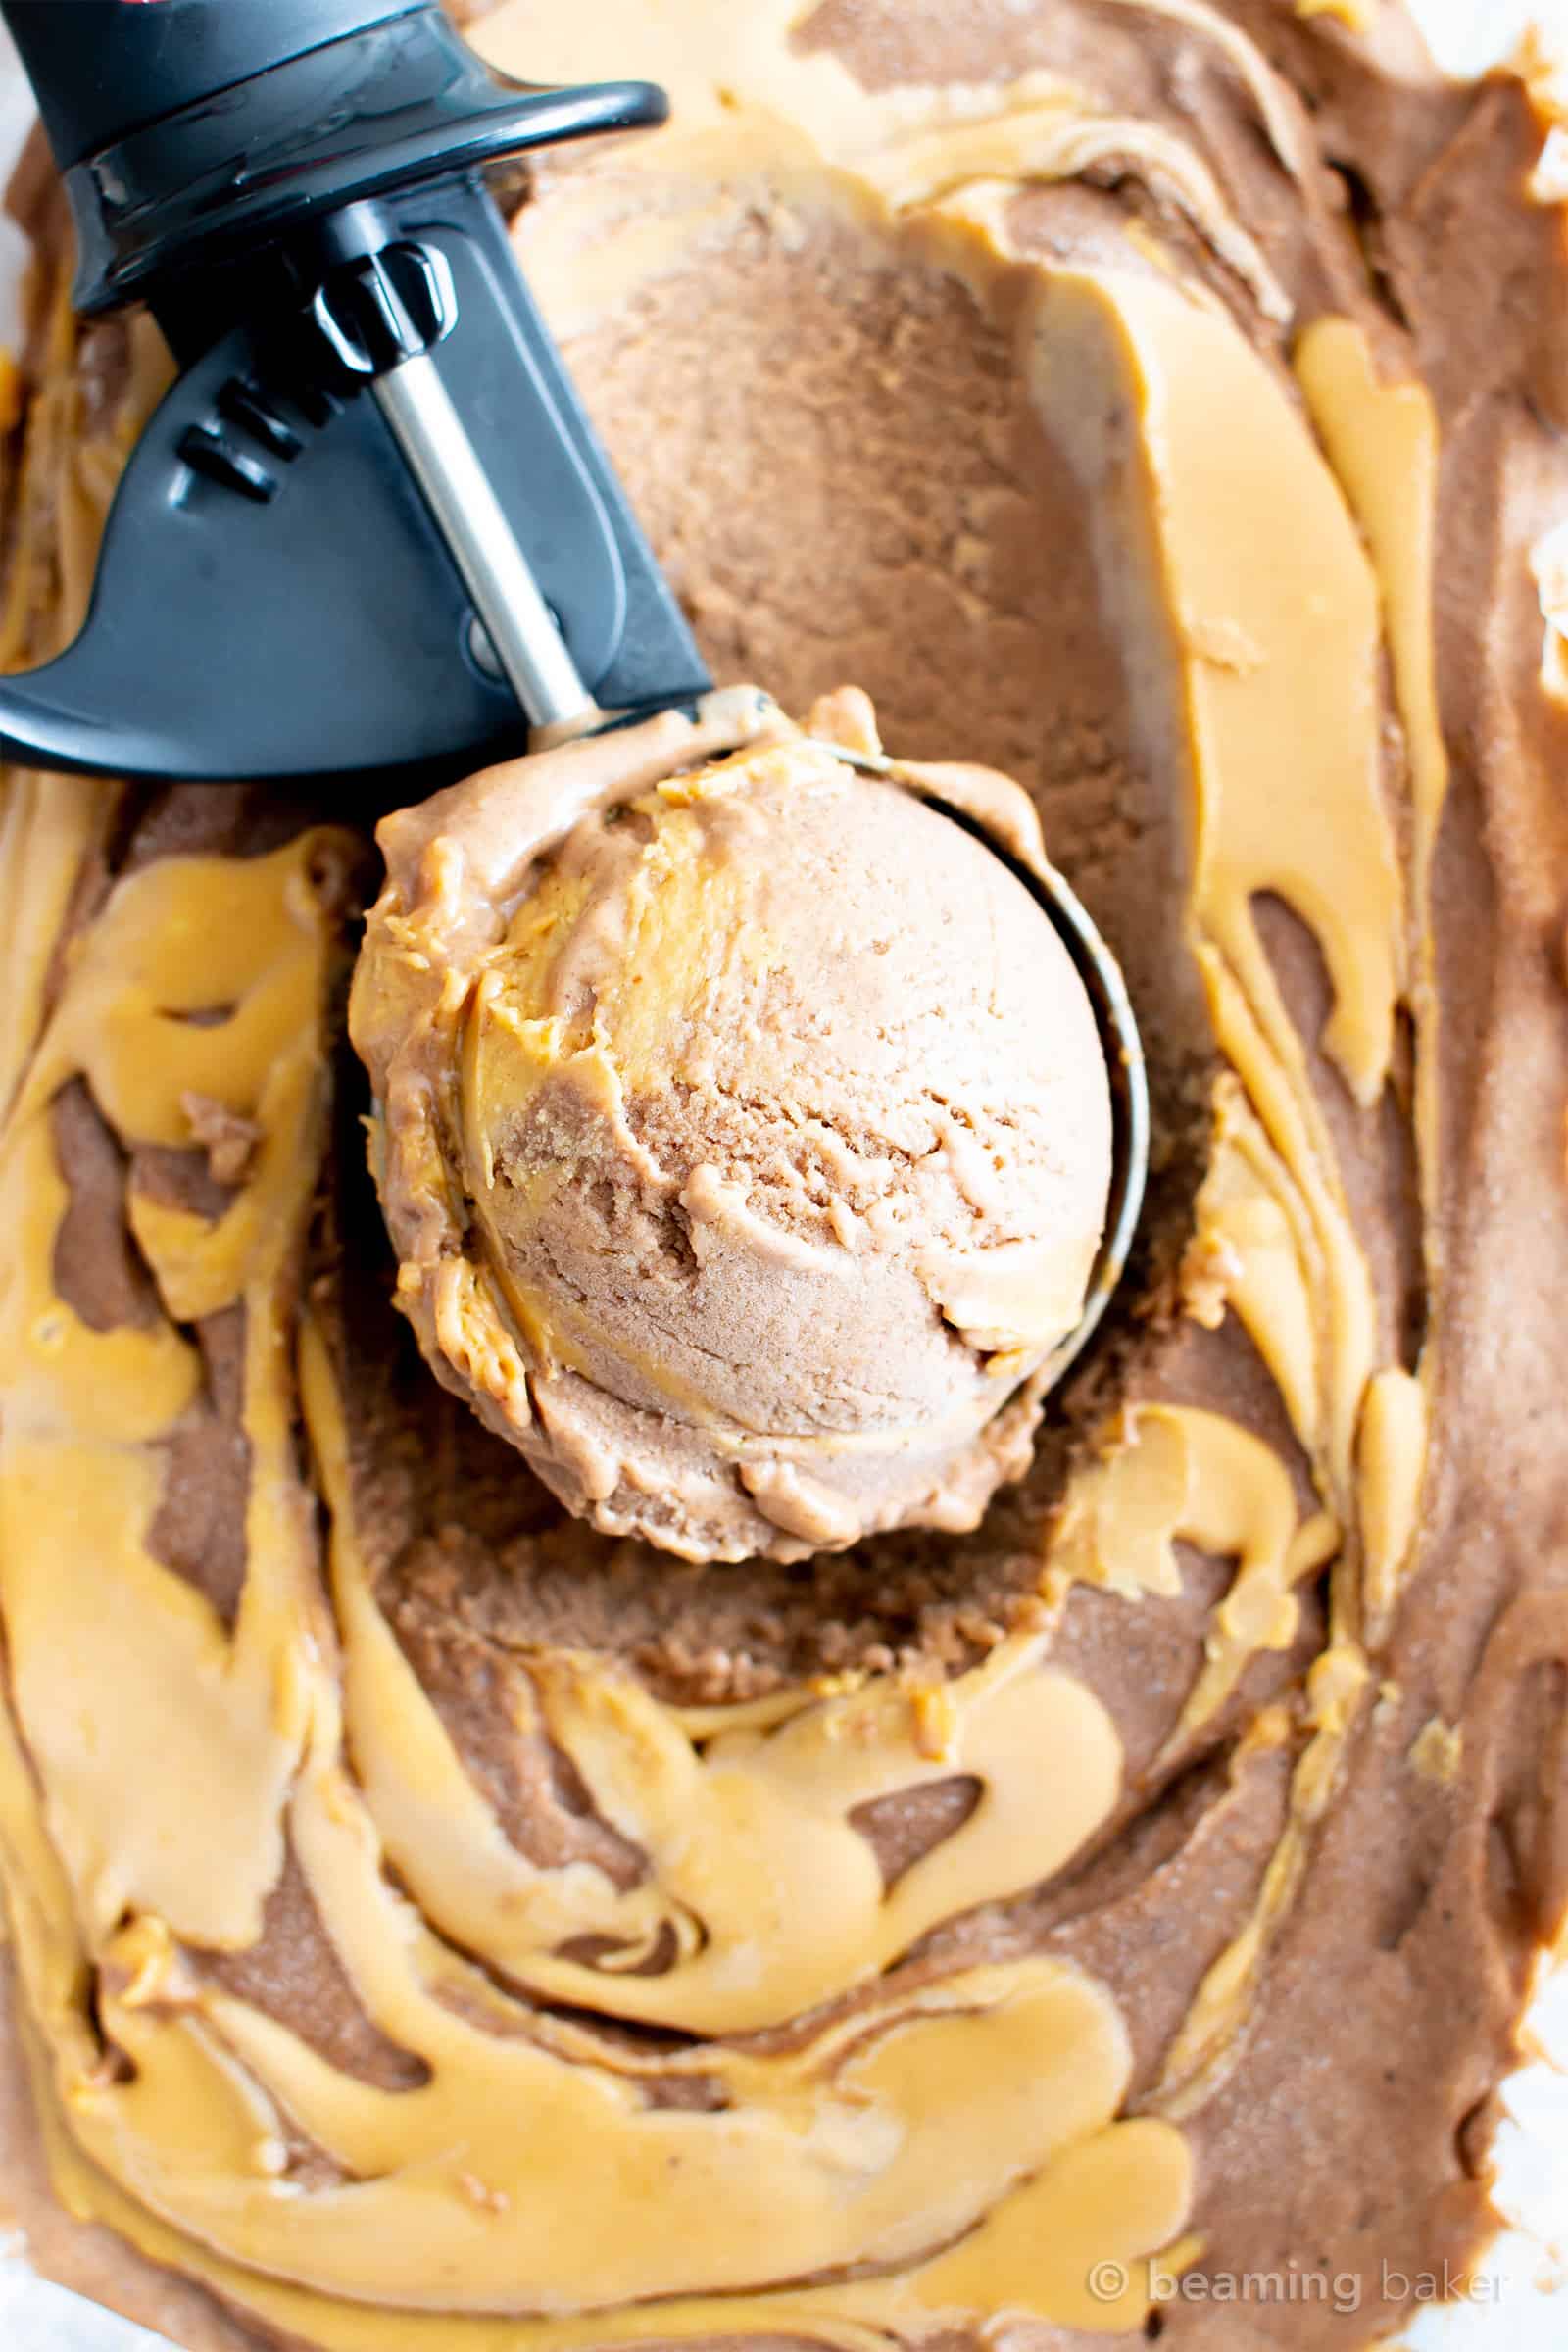 Healthy No Sugar Added Chocolate Peanut Butter Ice Cream (V, DF): a super easy, 5-ingredient recipe for the BEST deliciously creamy and chocolatey no churn peanut butter ice cream. #Vegan #DairyFree #IceCream #Paleo option #HealthyDesserts #PeanutButter #NoSugarAdded #Bananas | Recipe at BeamingBaker.com